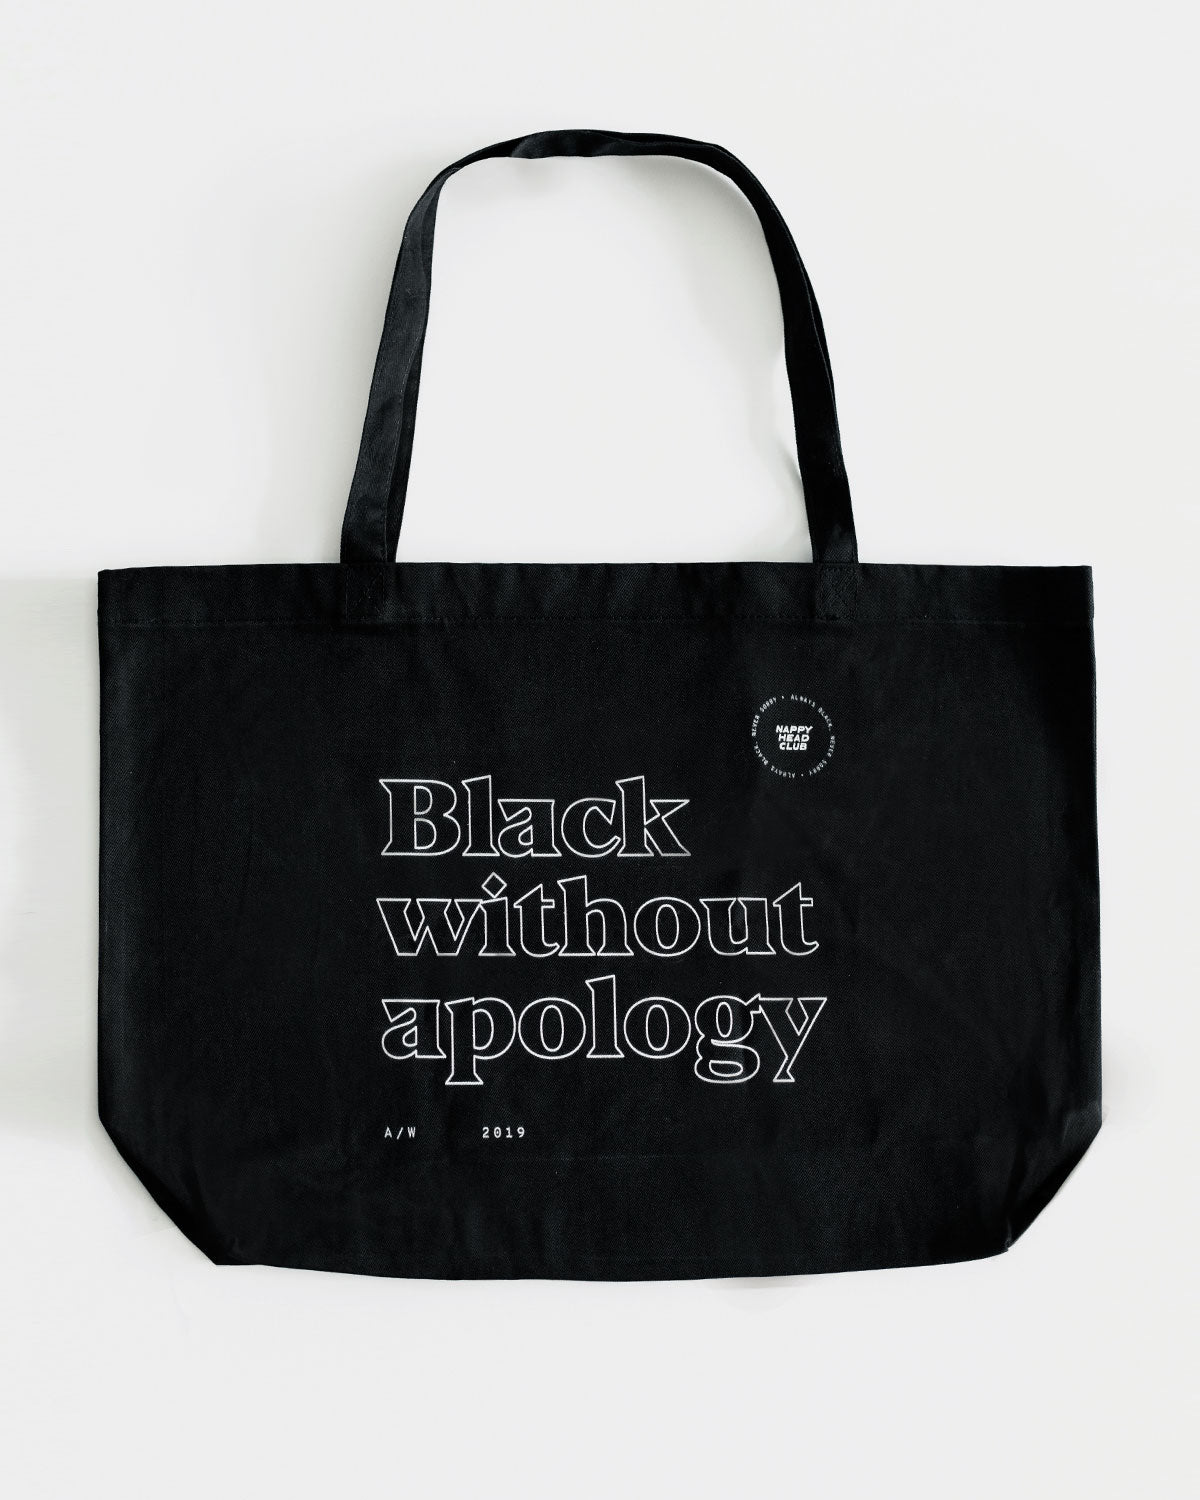 The Black Without Apology Tote Bag